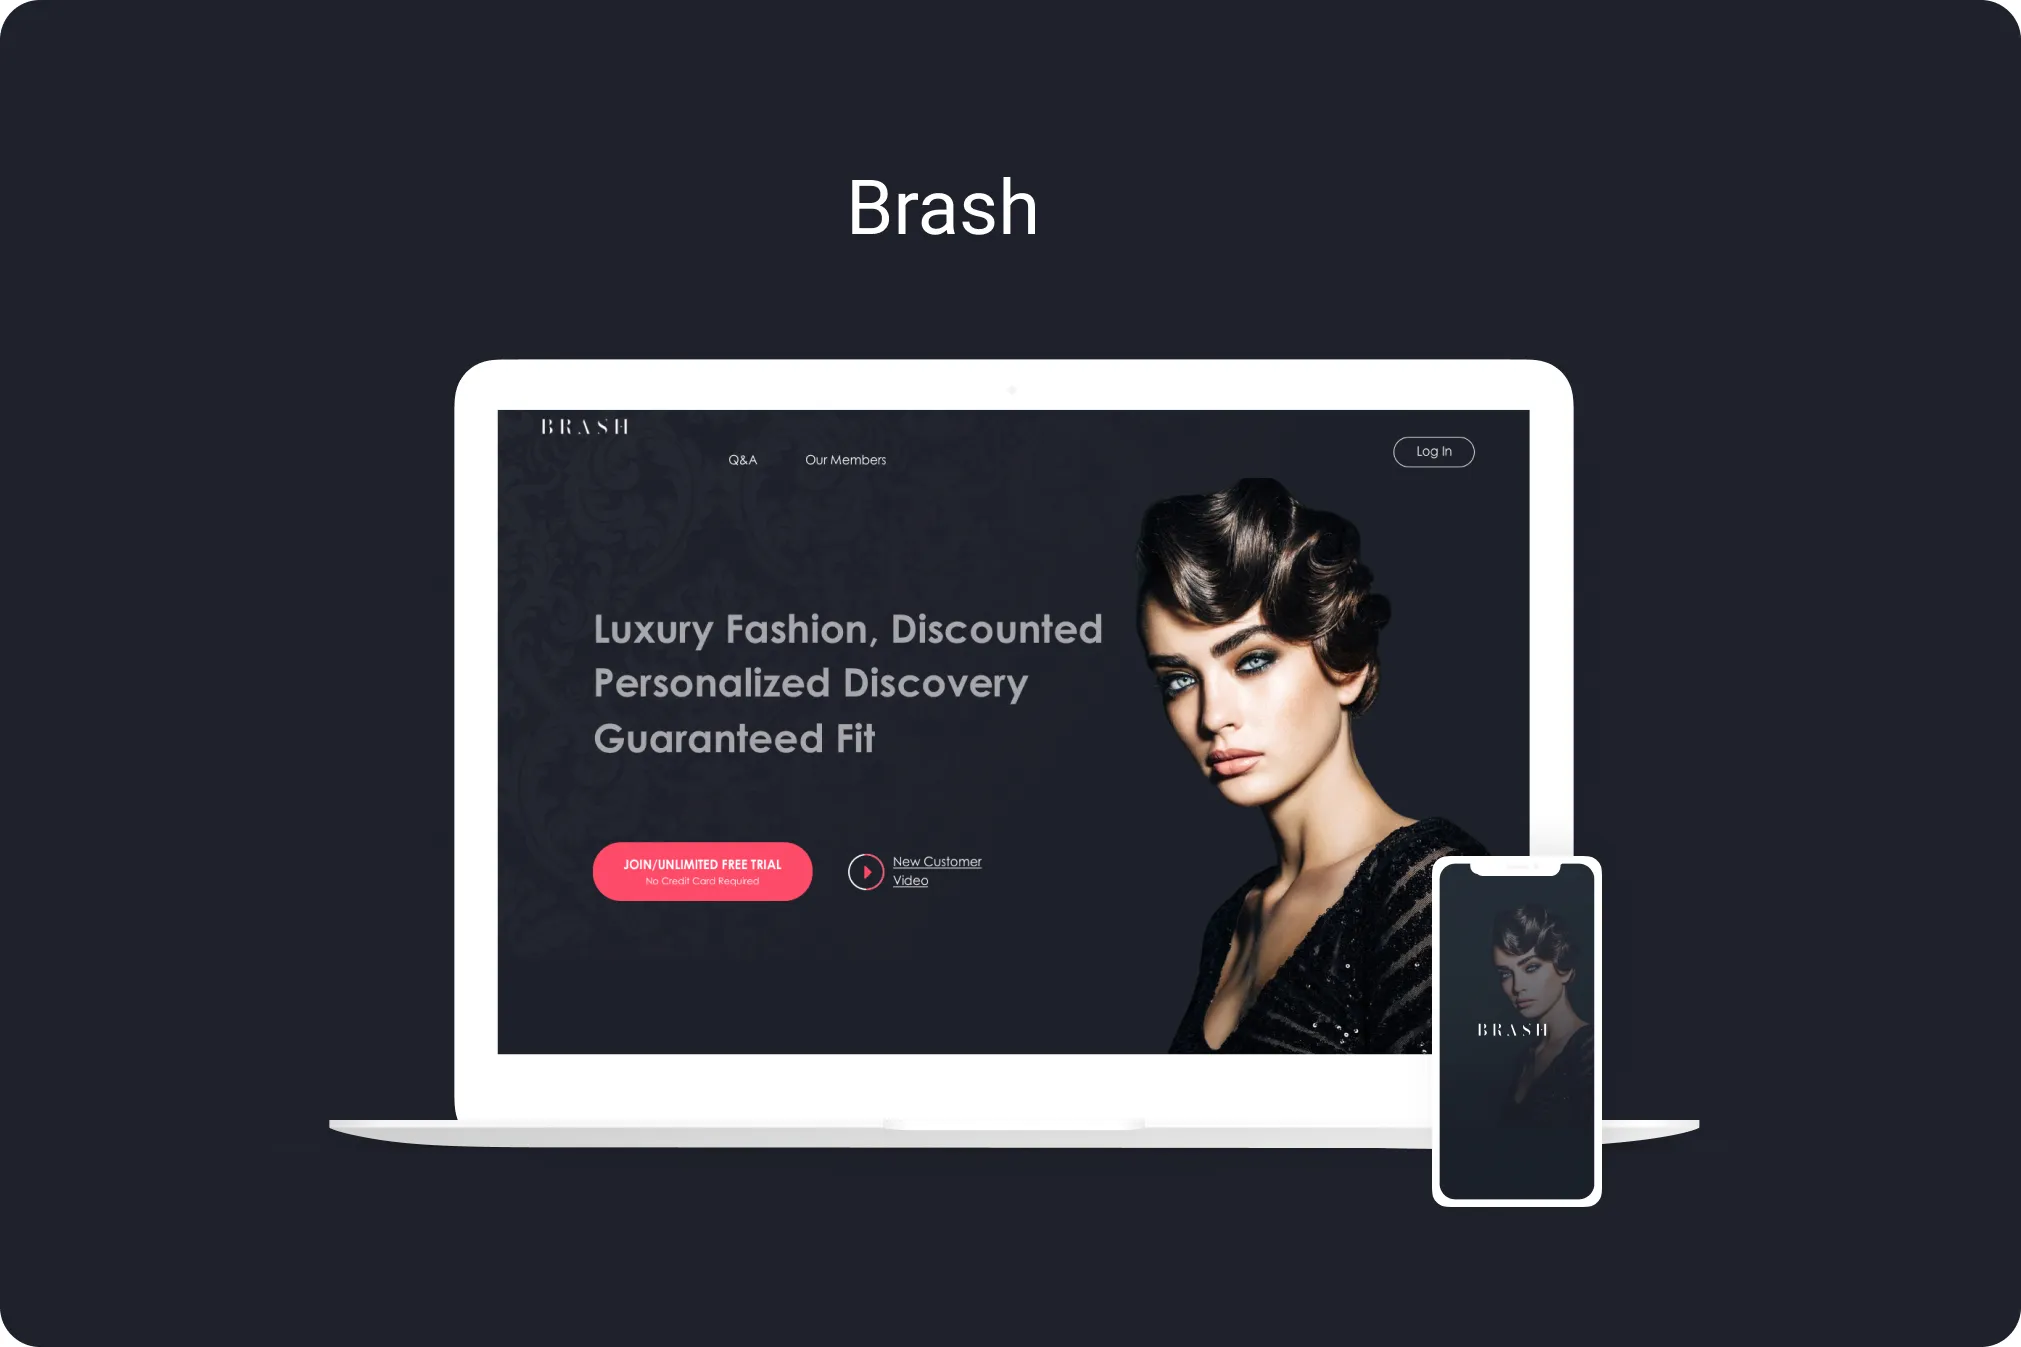 Brash Case Study - Luxury, discounted fashion with a guaranteed fit